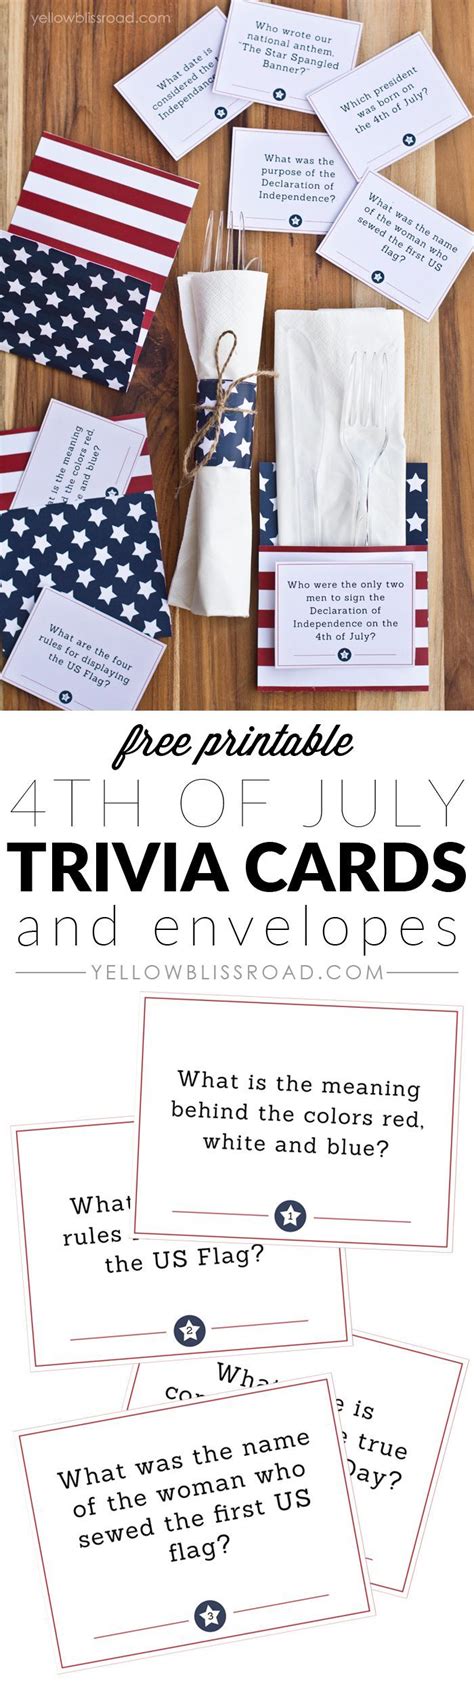 The 4th of july celebration is the perfect time to teach our kids about our. Free Printable 4th of July Trivia Cards & Utensil Holders | Trivia, Utensils and Free printable